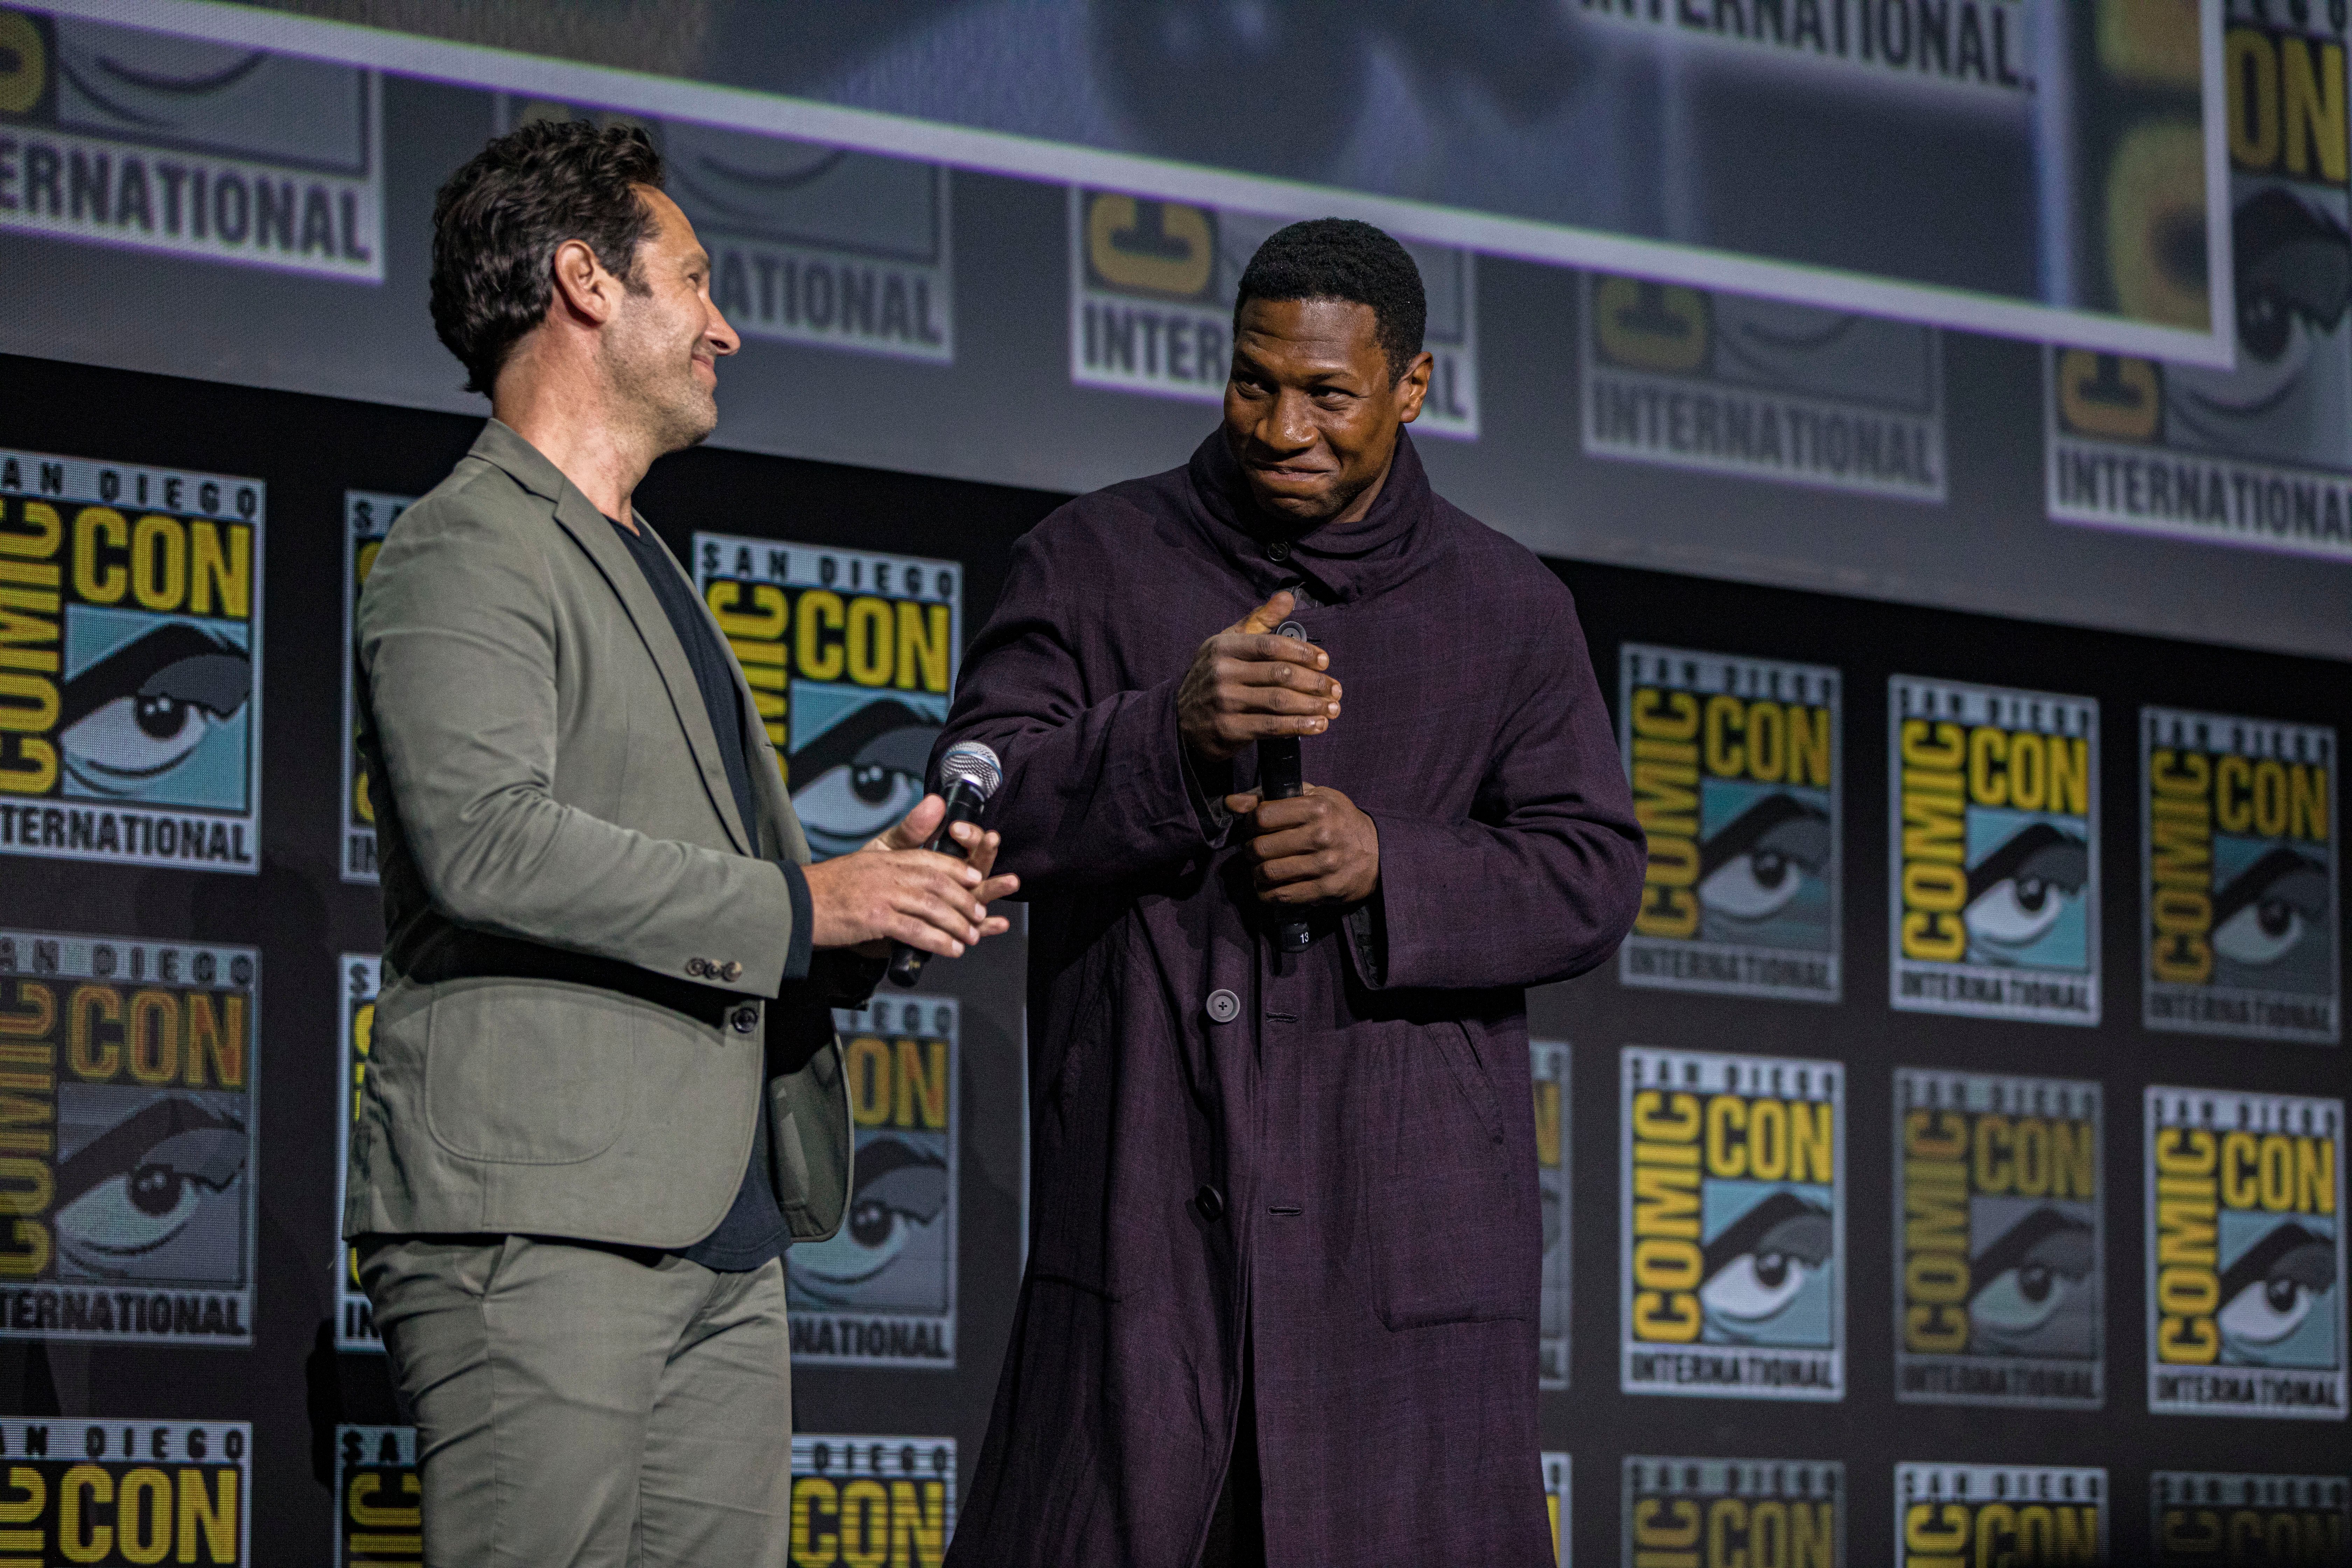 Paul Rudd and Jonathan Majors, who star as Scott Lang and Kang the Conqueror in the 'Ant-Man and the Wasp: Quantumania' trailer, speako onstage as Comic-Con.